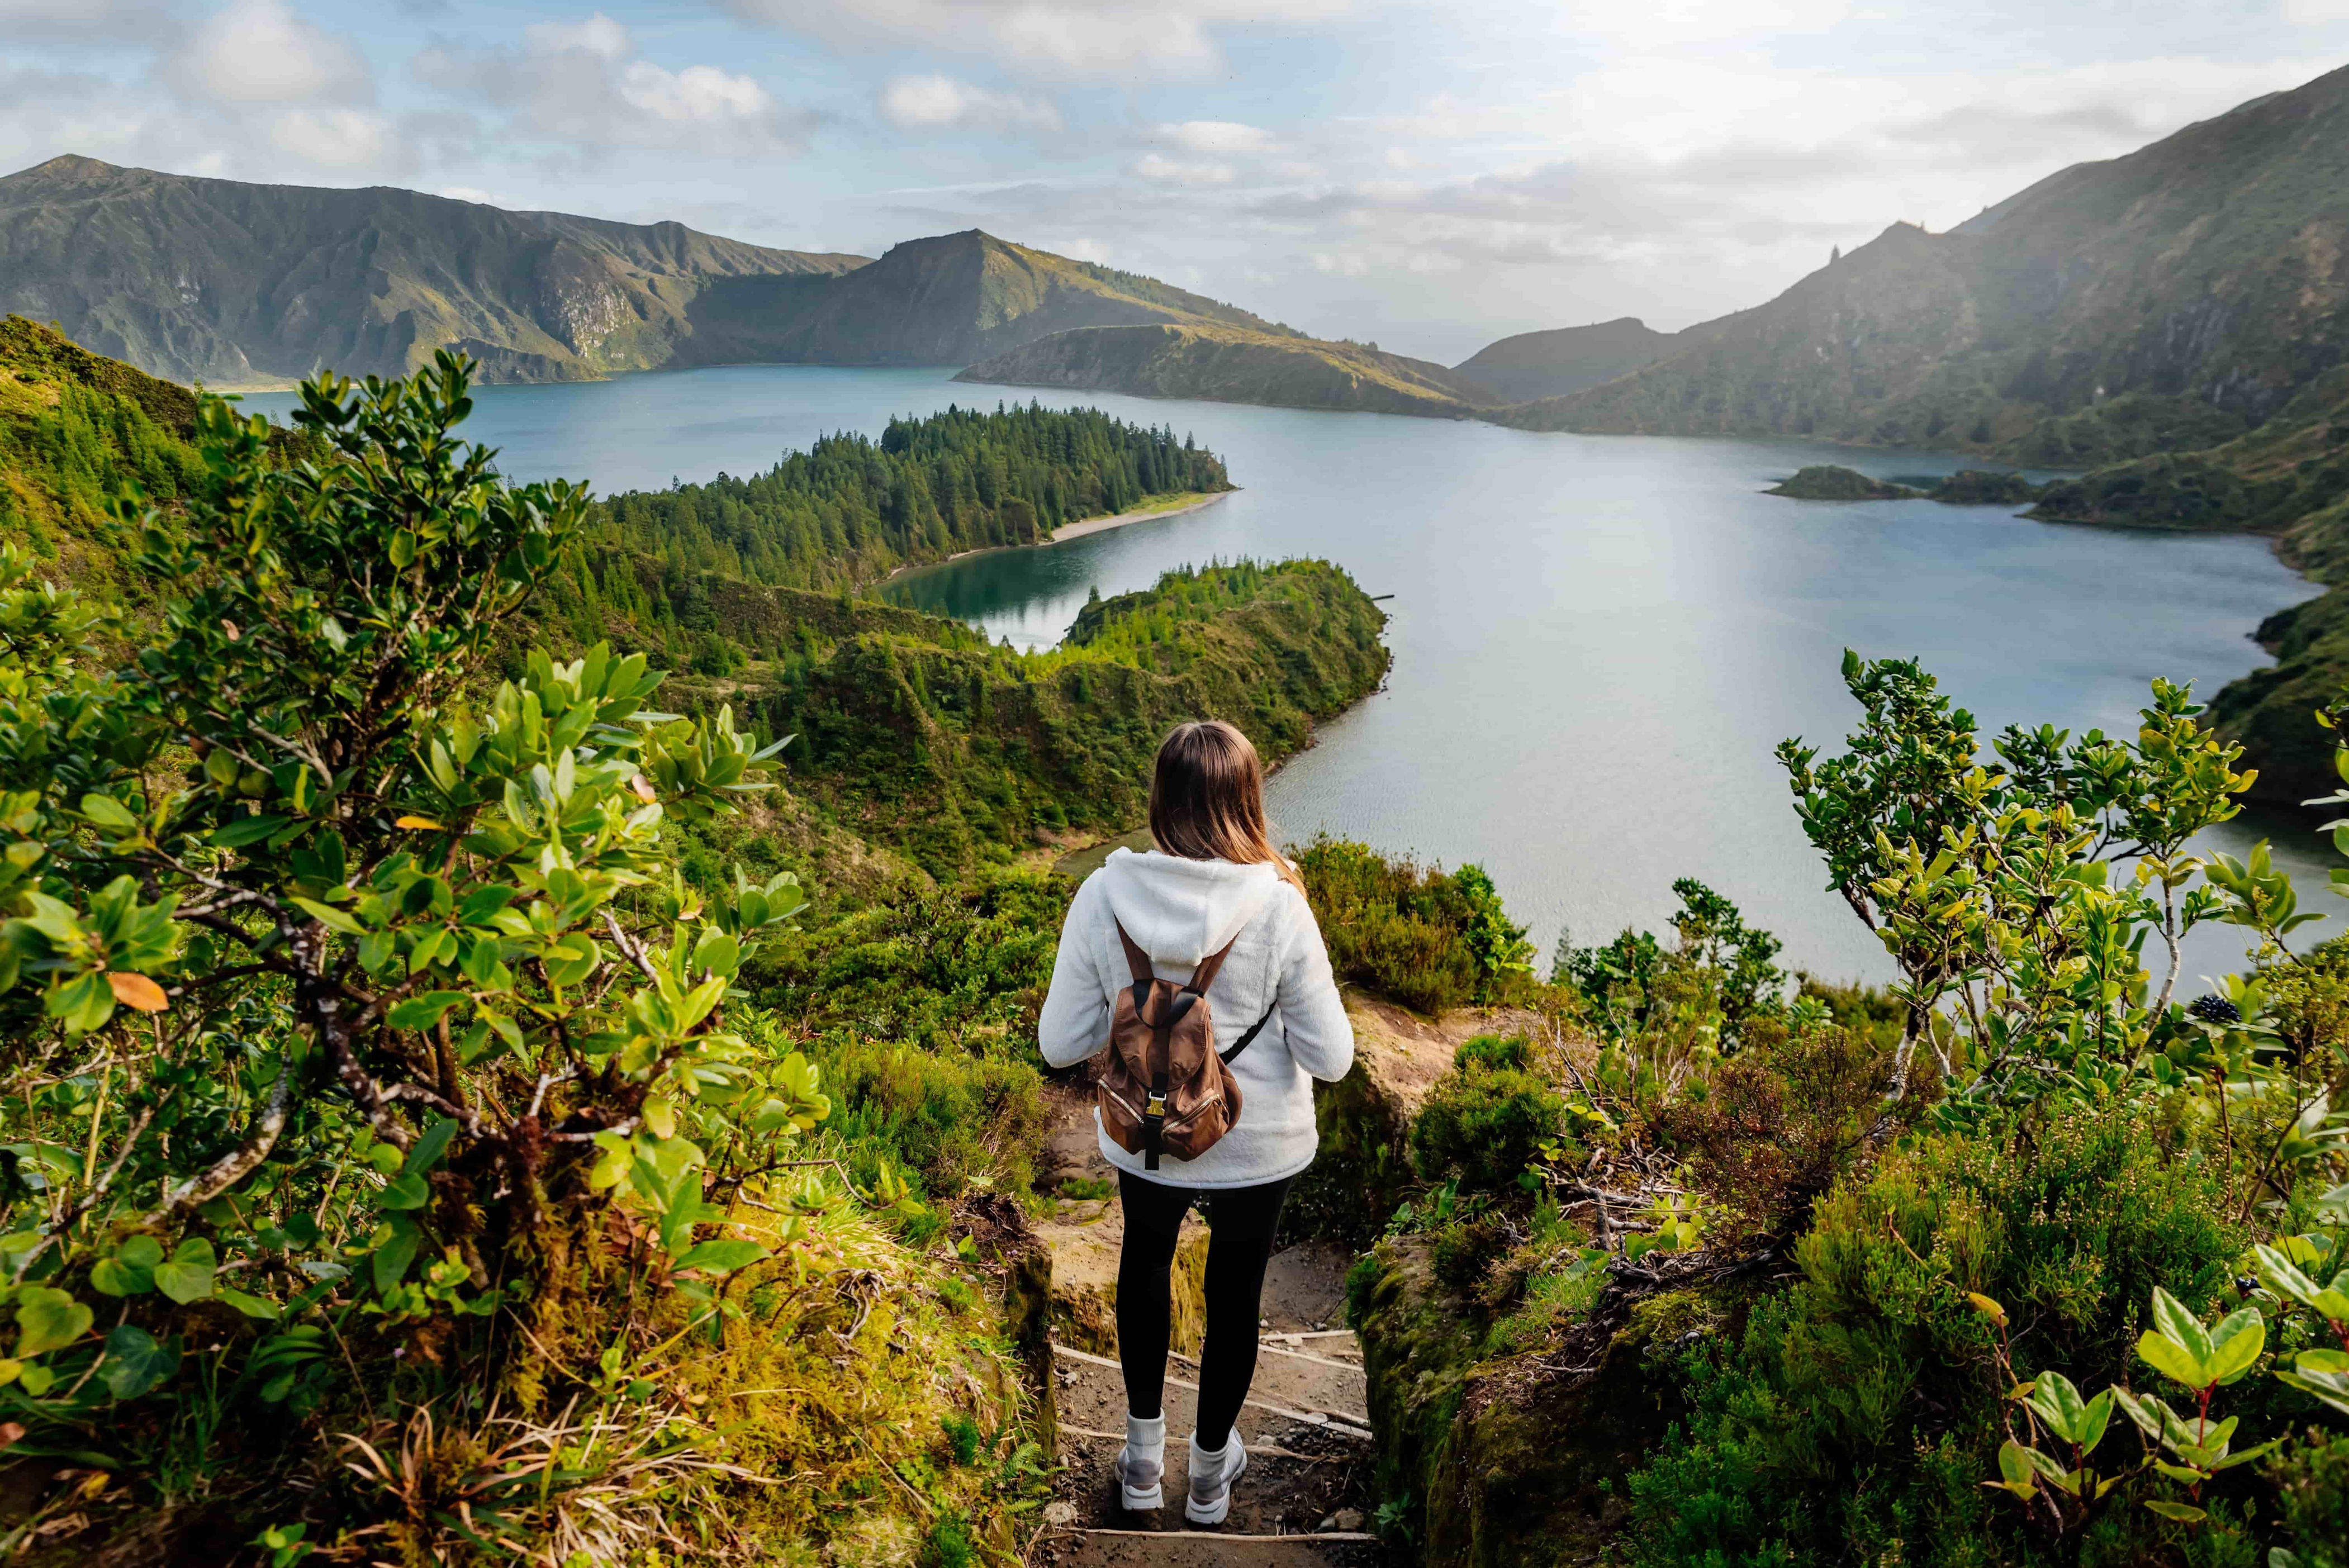 <p>The biggest island in the Azores archipelago, São Miguel is nicknamed “The Green Island” (it’s also been called the “<a href="https://www.travelandleisureasia.com/global/destinations/europe/sao-miguel-island-is-called-the-hawaii-of-europe/#:~:text=Destinations-,This%20Island%20Is%20Called%20The%20'Hawaii%20Of%20Europe'%20%E2%80%94%20With,Volcanic%20Peaks%20And%20Beautiful%20Waterfalls&text=The%20largest%20island%20in%20the,its%20most%20pure%2C%20pristine%20stage." title="https://www.travelandleisureasia.com/global/destinations/europe/sao-miguel-island-is-called-the-hawaii-of-europe/#:~:text=Destinations-,This%20Island%20Is%20Called%20The%20'Hawaii%20Of%20Europe'%20%E2%80%94%20With,Volcanic%20Peaks%20And%20Beautiful%20Wate">Hawaii of Europe</a>”) because of its lush and dramatic landscape featuring black sand beaches. The volcanic crater lake Lagoa do Fogo, at the centre of the island, is considered a must-see because of its beautiful vistas and hiking opportunities. <a href="https://www.visitazores.com/en/experience-the-azores/whale-watching" title="https://www.visitazores.com/en/experience-the-azores/whale-watching">Whale watching</a> is also a popular activity to book, as the Azores is one of the world’s largest whale sanctuaries, with more than 20 different cetacean species swimming in the waters. </p>